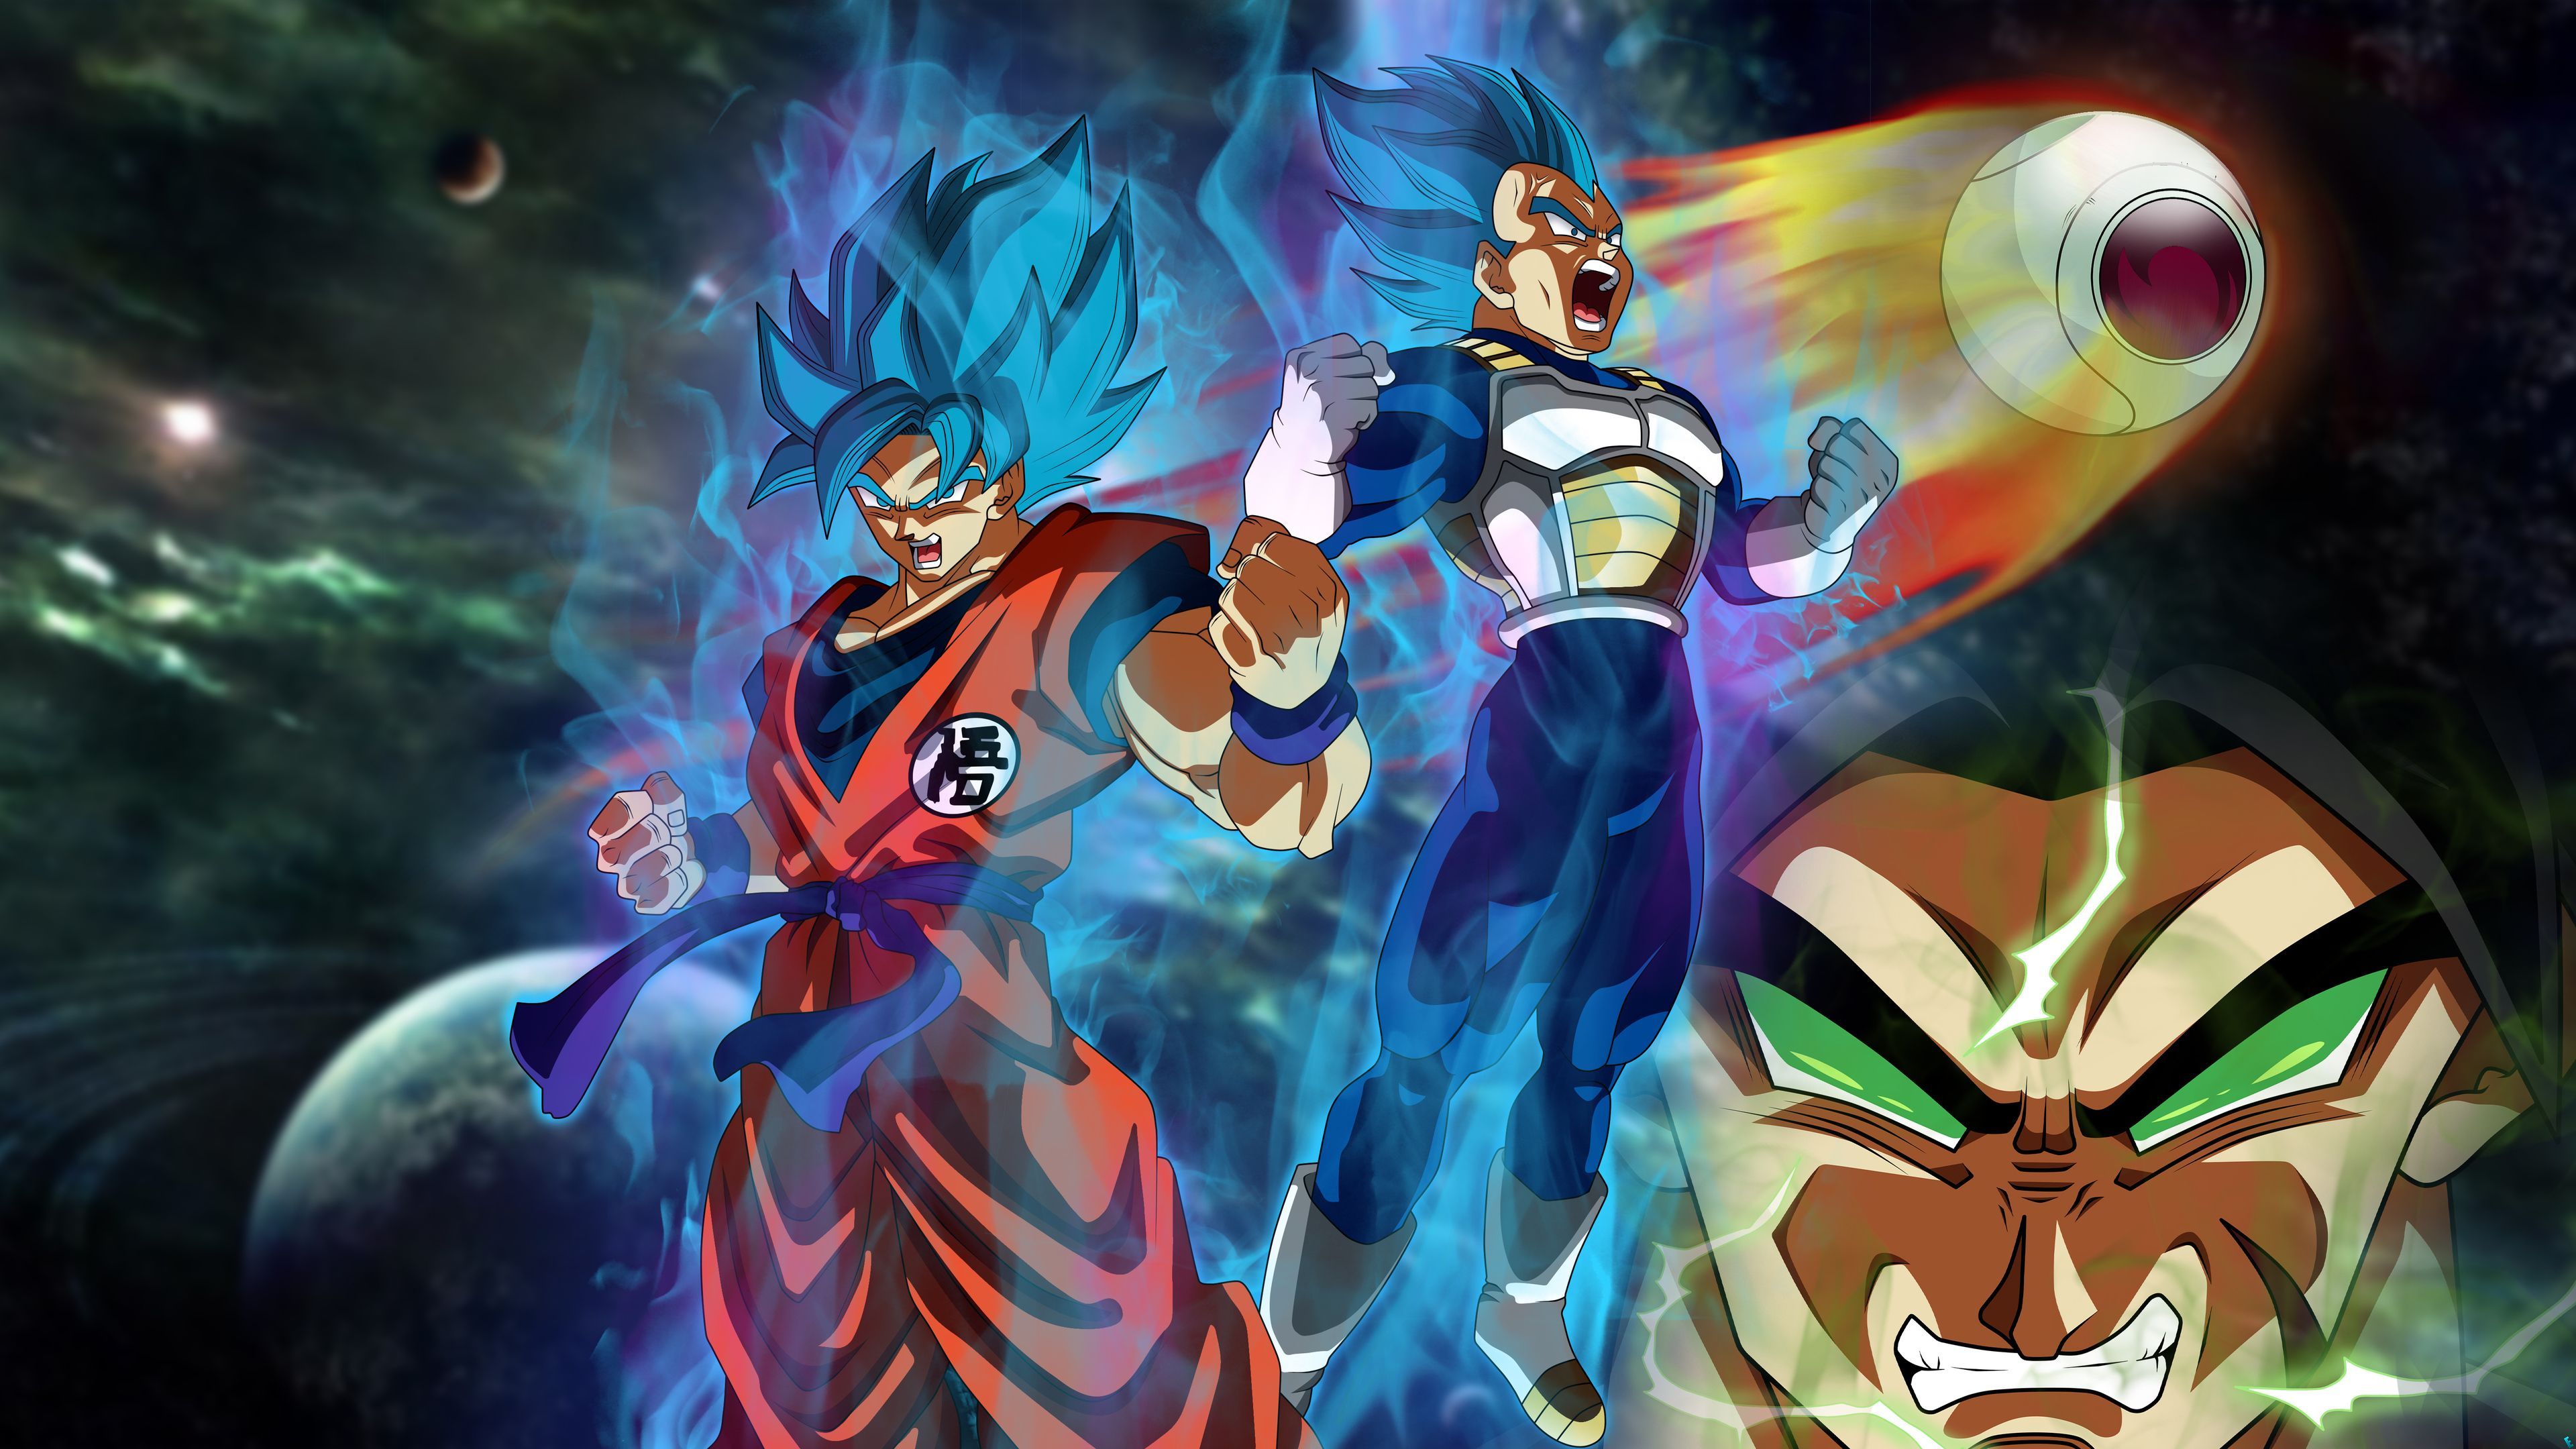 Dragon Ball Super Chapter 58 Release Date Predictions: Goku and Vegeta Team